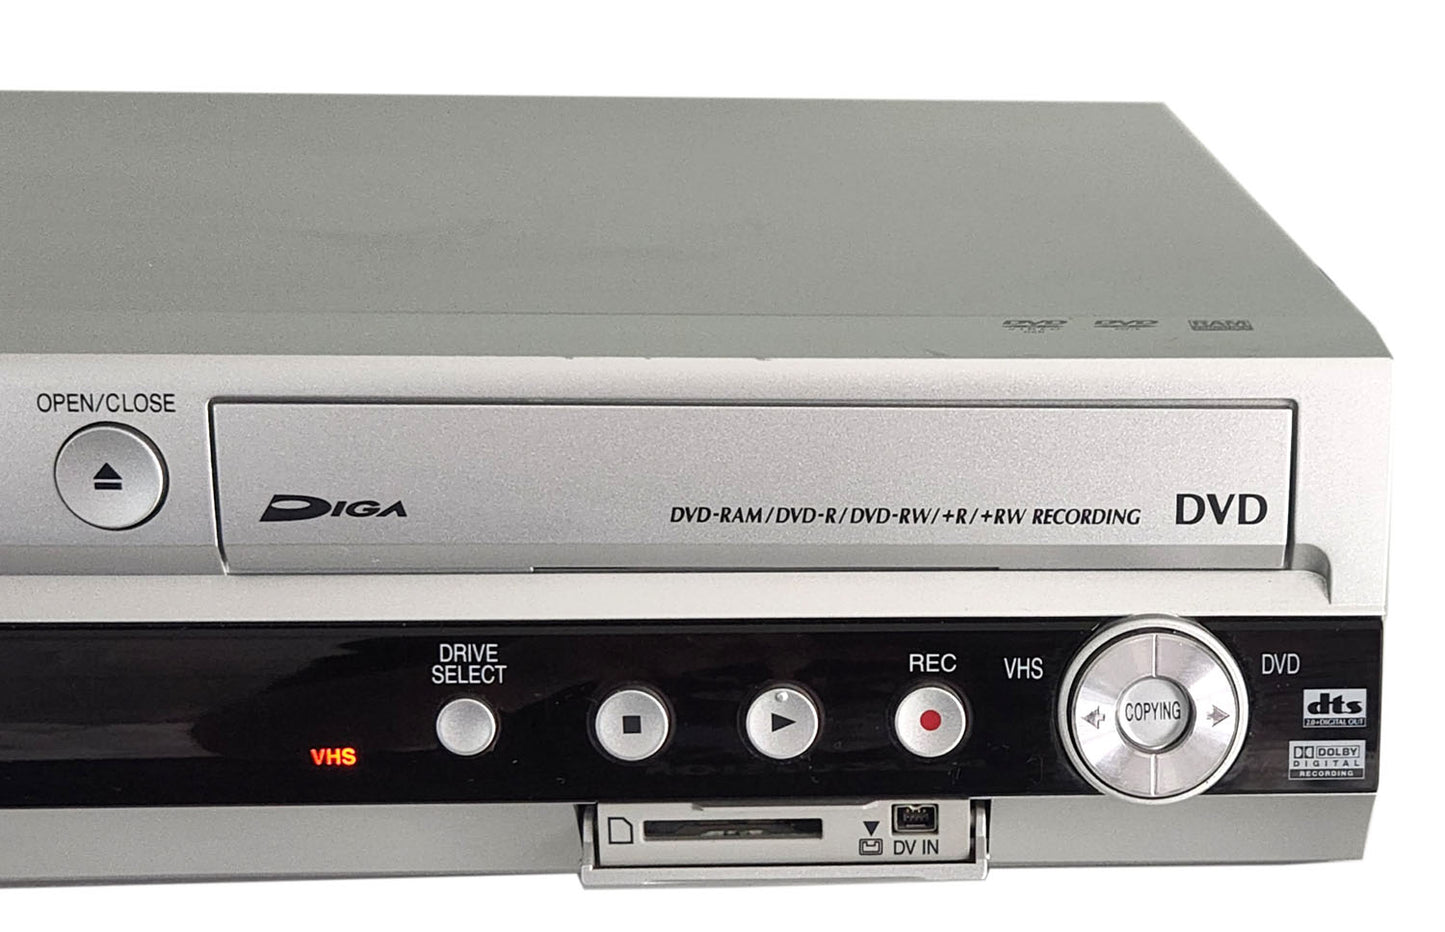 Panasonic DMR-ES45V VCR/DVD Recorder Combo with HDMI - Right Side